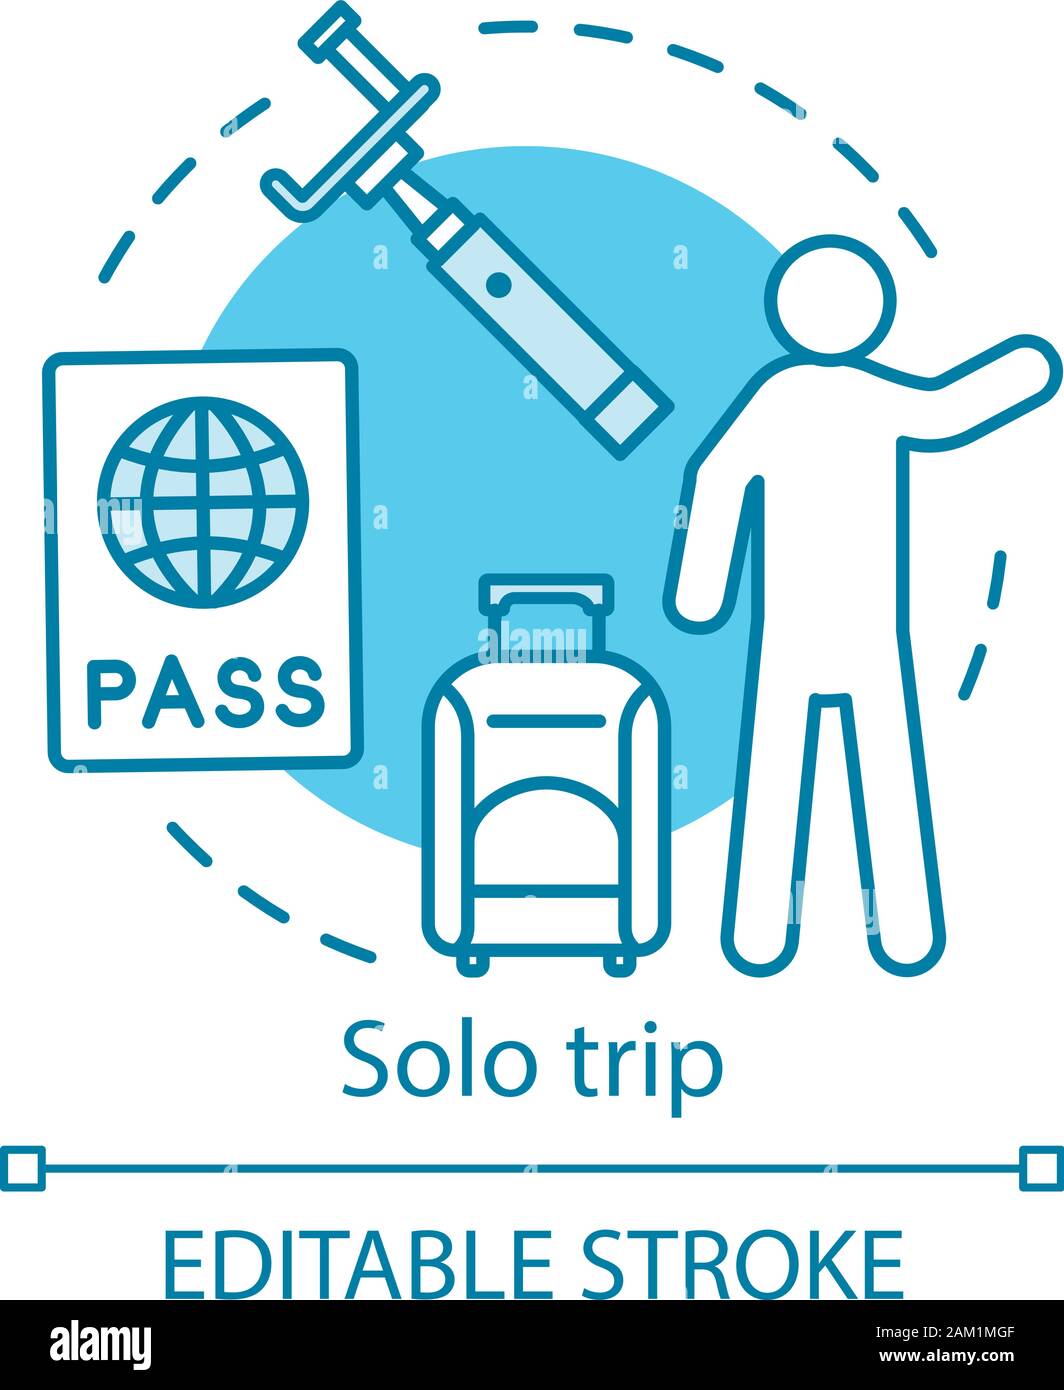 Solo trip concept icon. Travel style idea thin line illustration. Traveling alone. Vacation destinations. City tours. Vector isolated outline drawing. Stock Vector